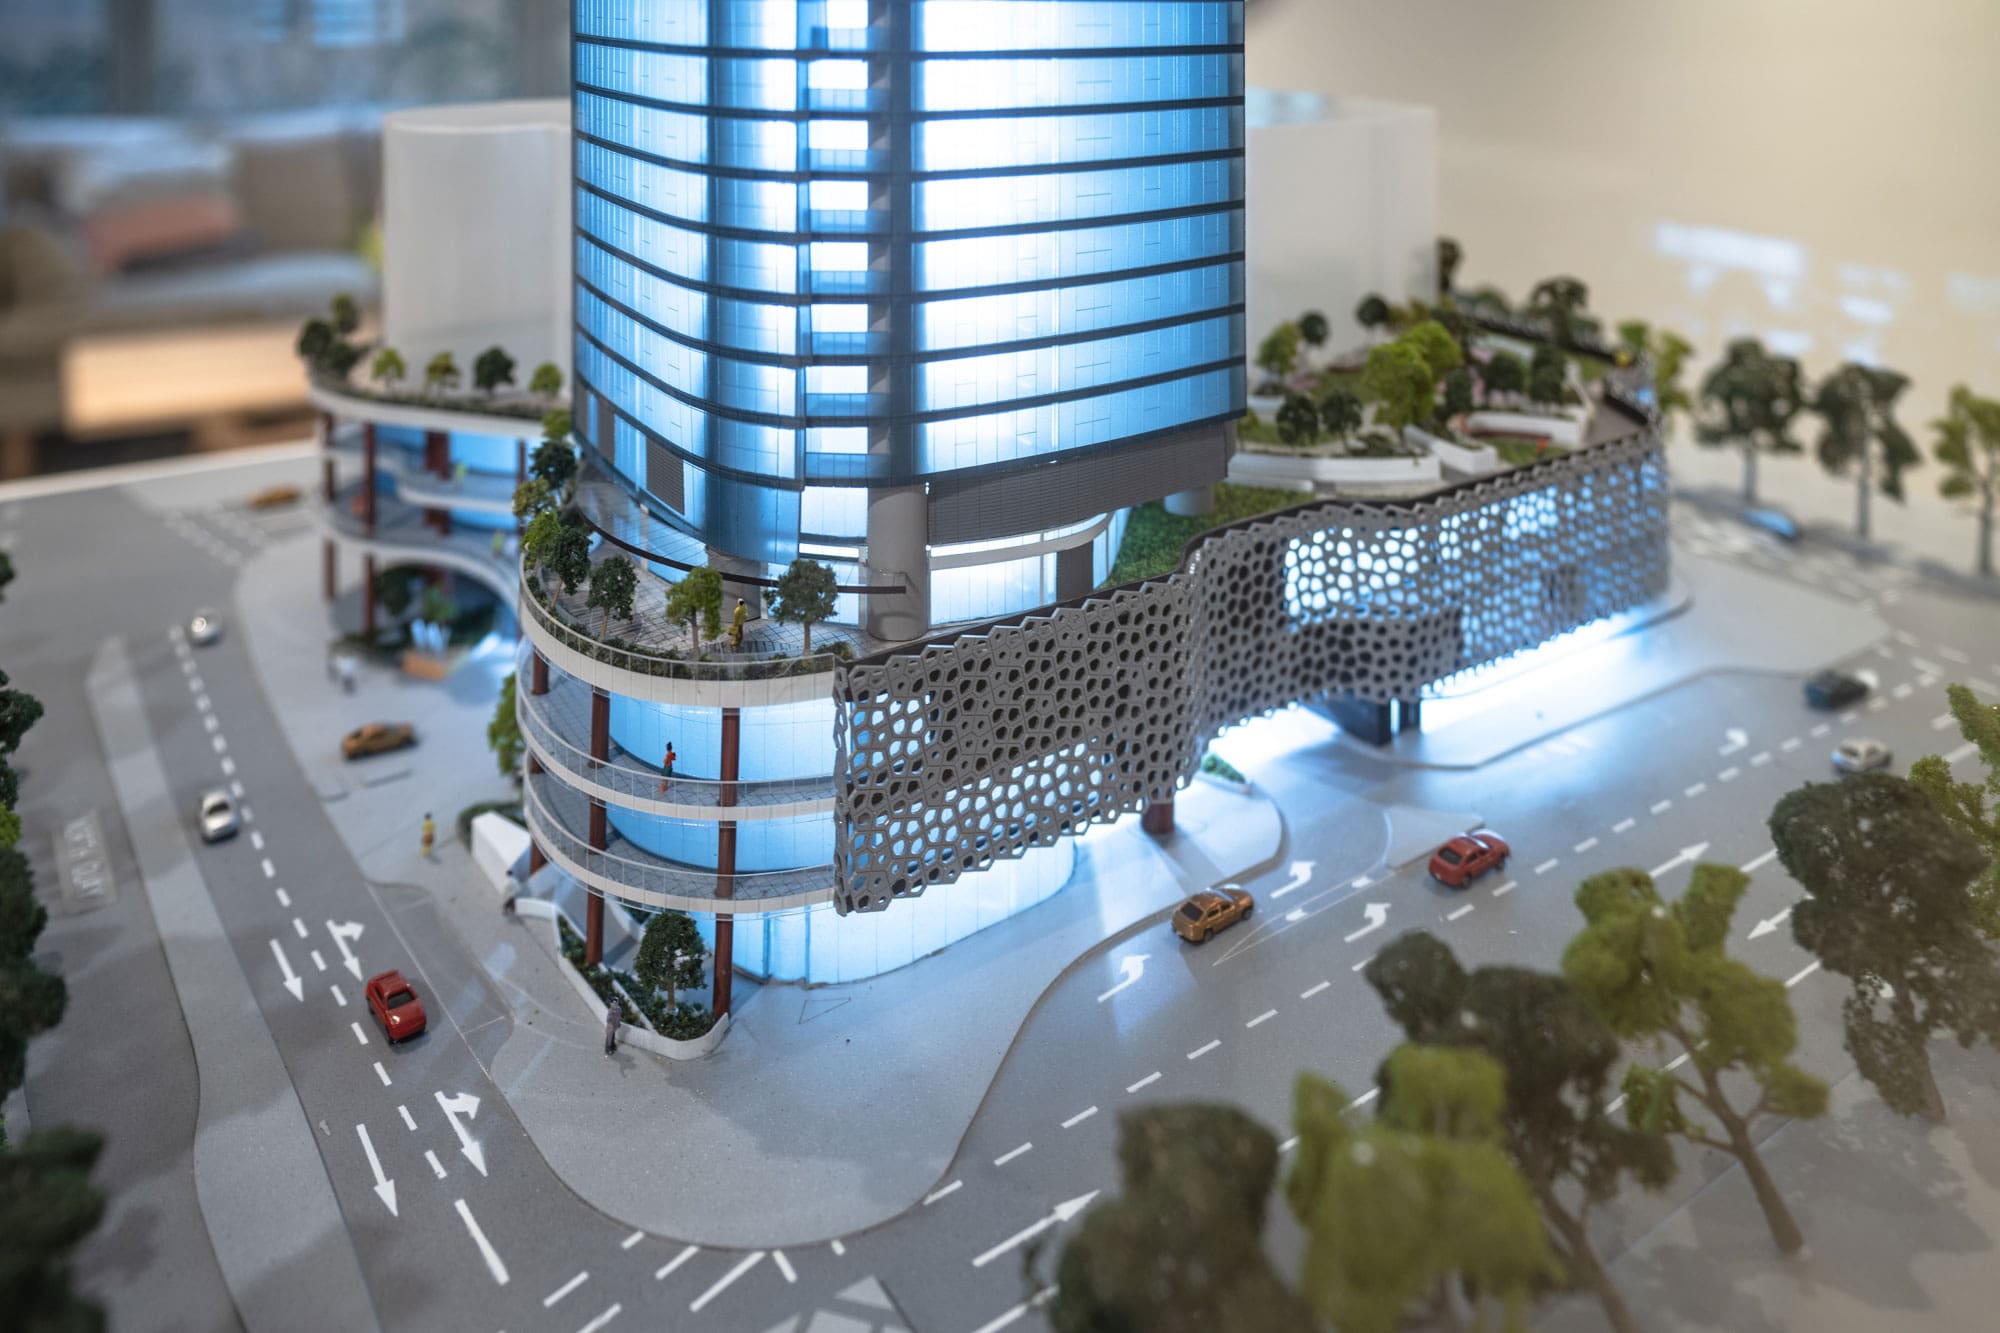 3D architectural scale models canberra